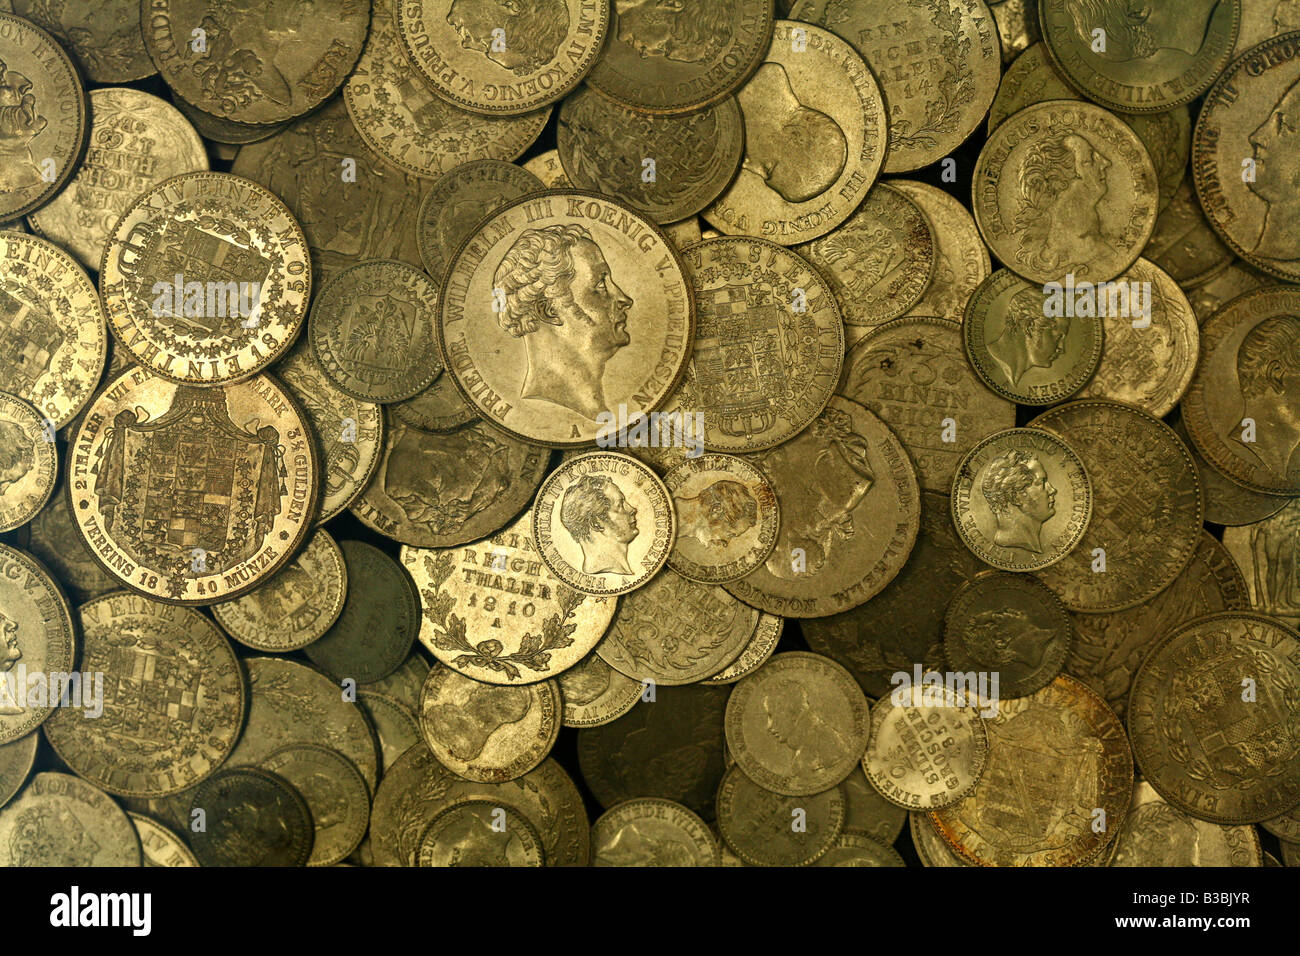 Prussian coins from the numismatic collection of Bode Museum in Berlin, Germany Stock Photo